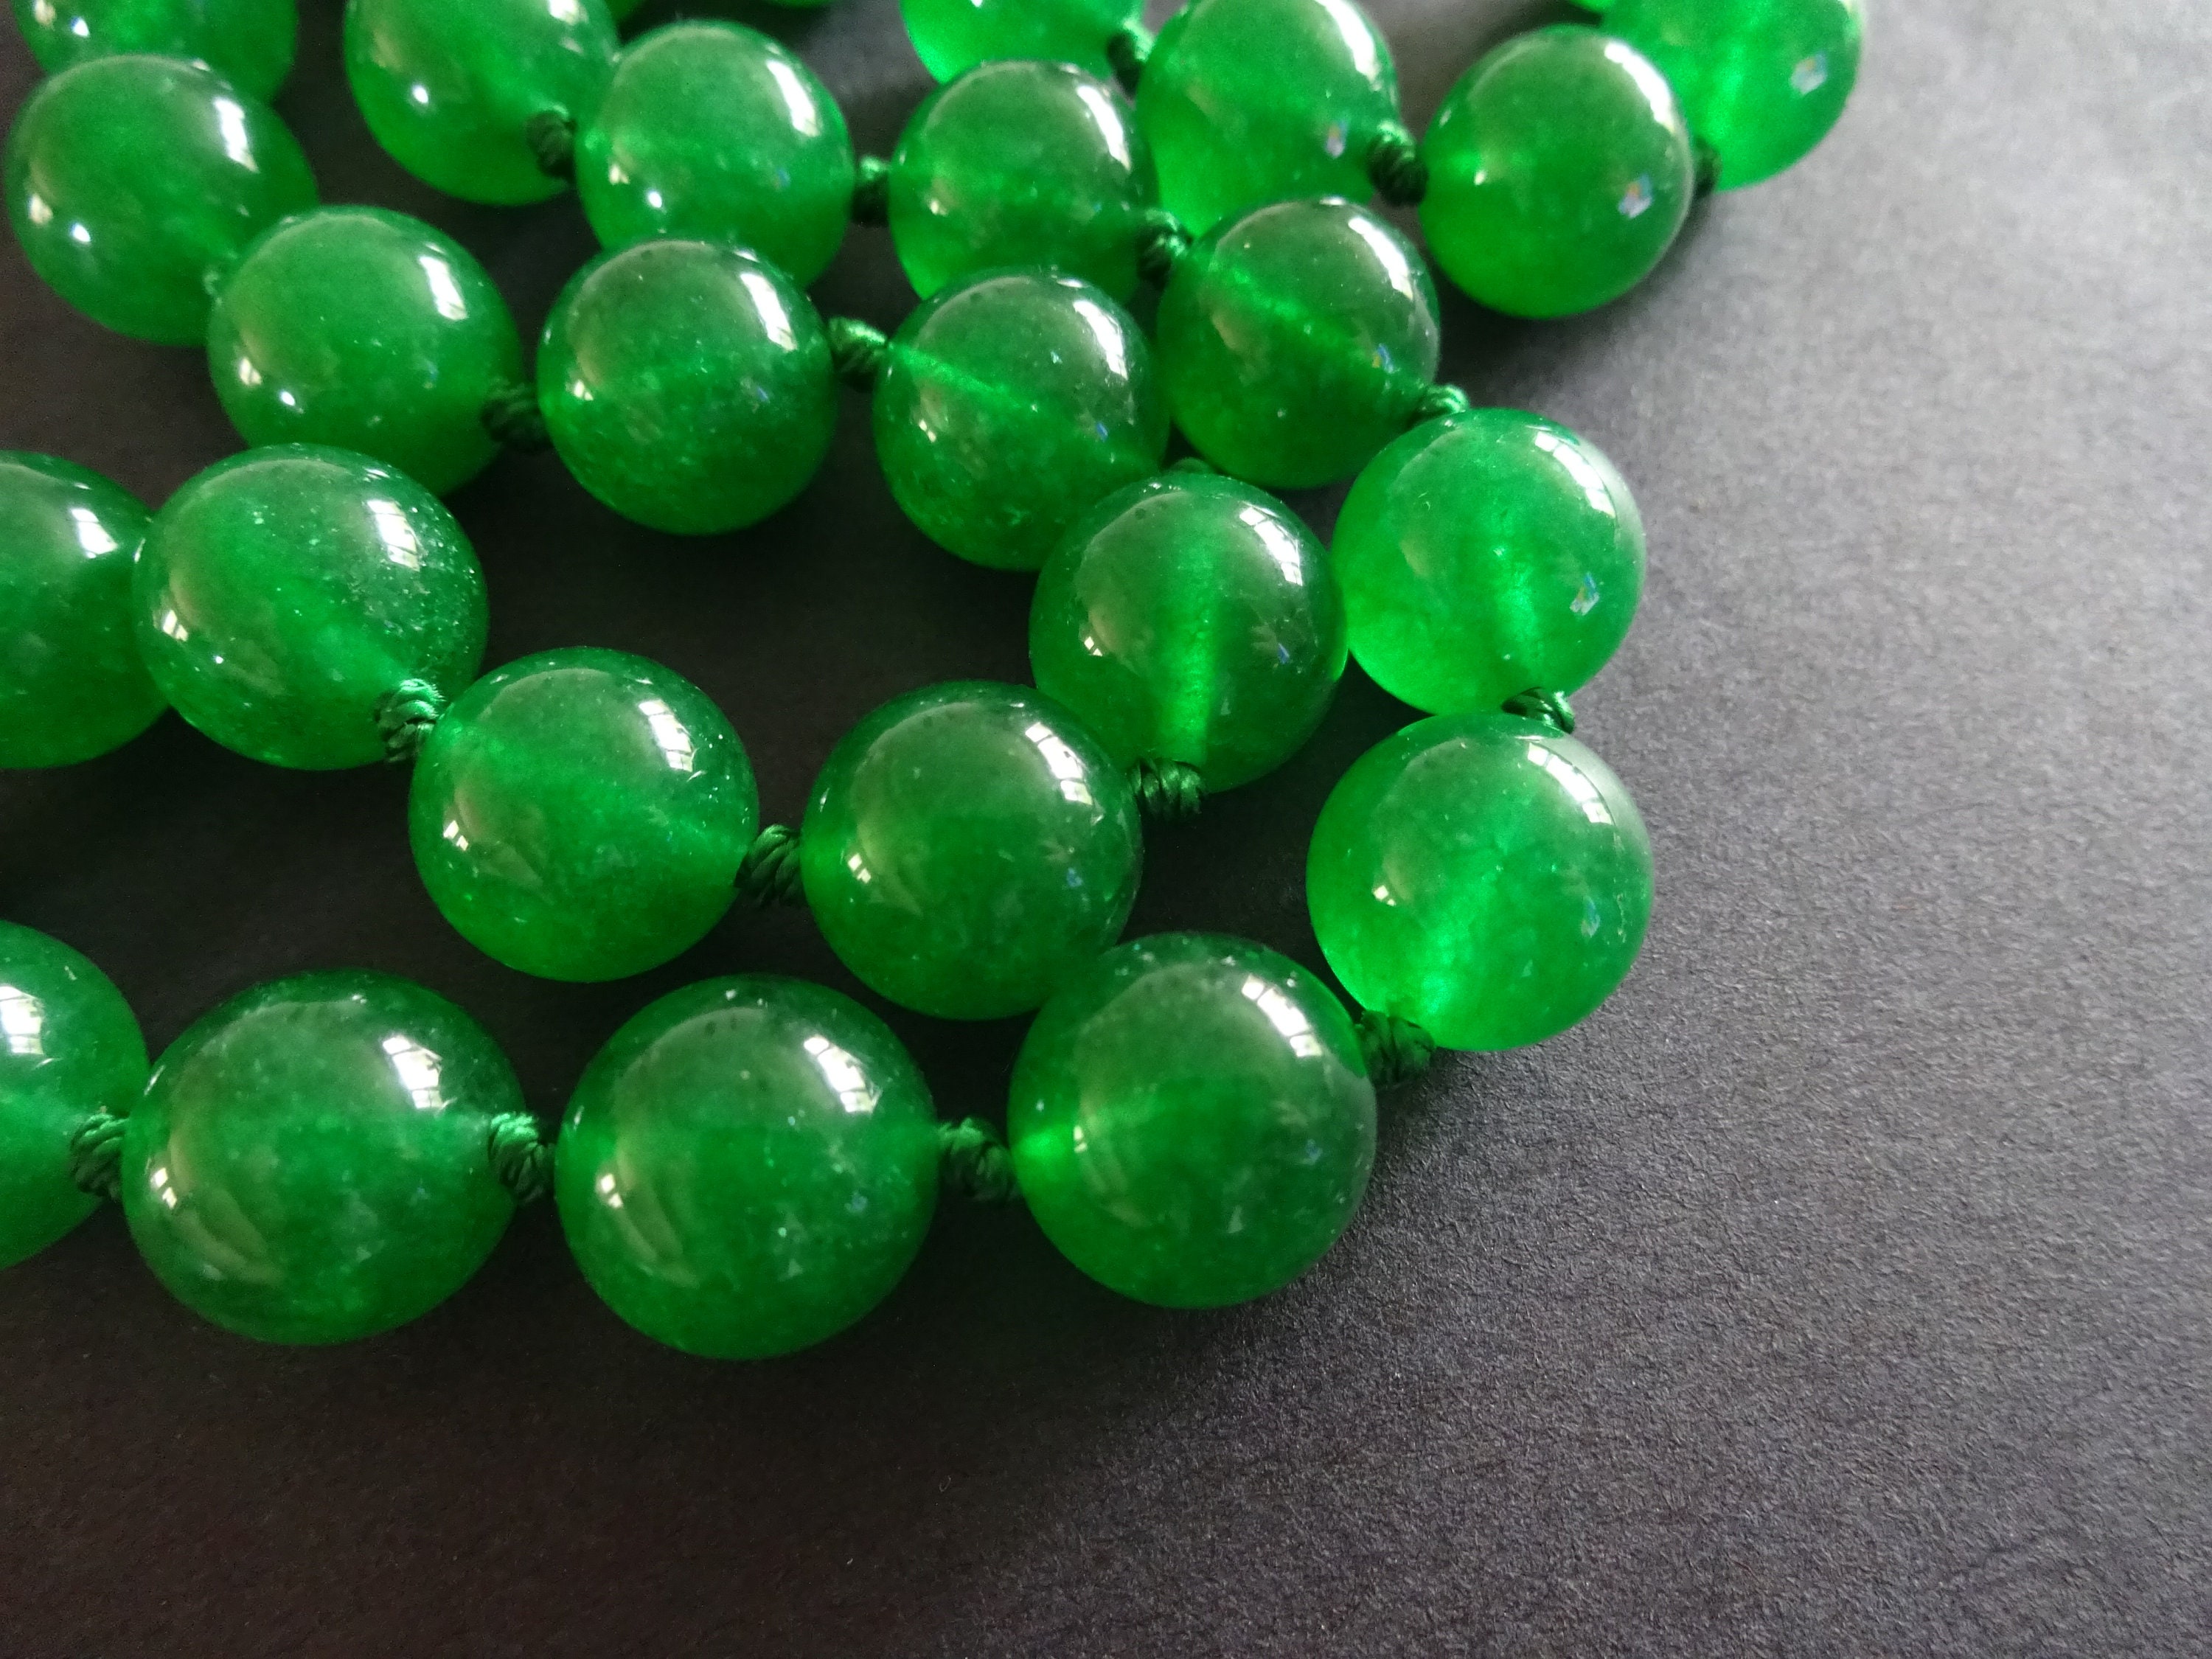 18 Imperial Green Quartz / Malaysia Jade 14mm Beads Necklace-D003023